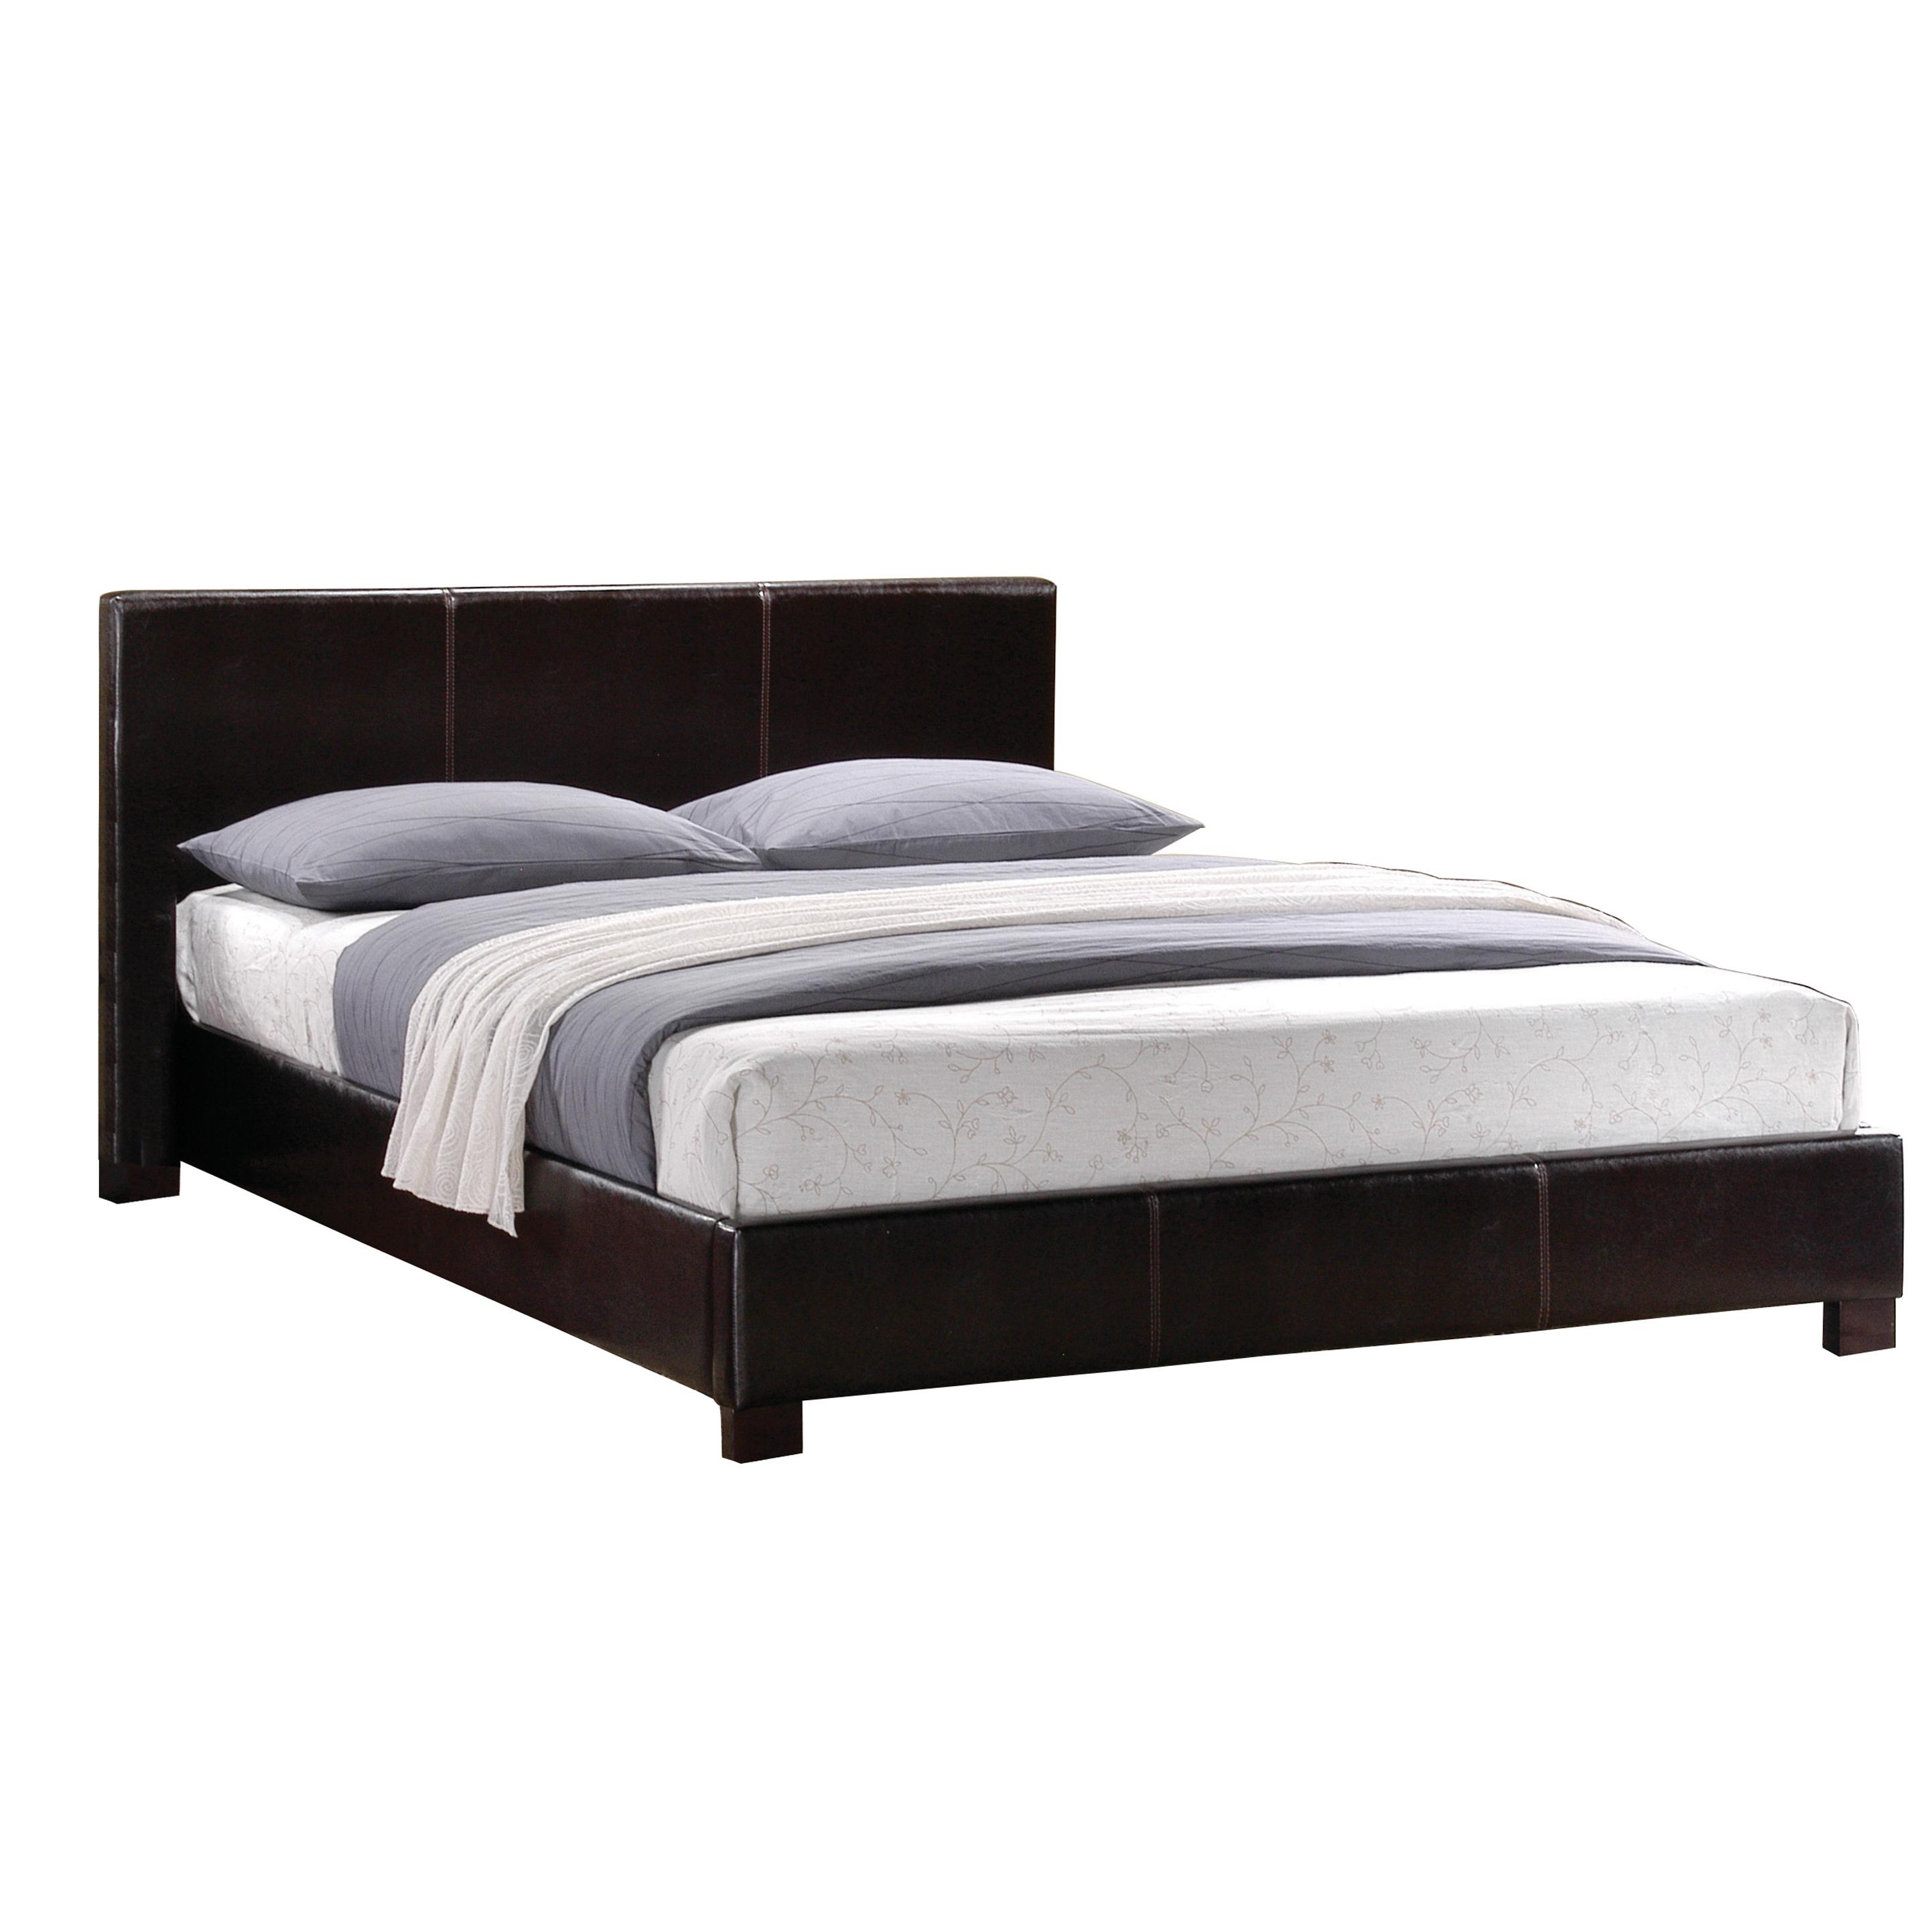 Transitional Bed 5790F-1* Zoey 5790F-1* in Dark Brown Faux Leather